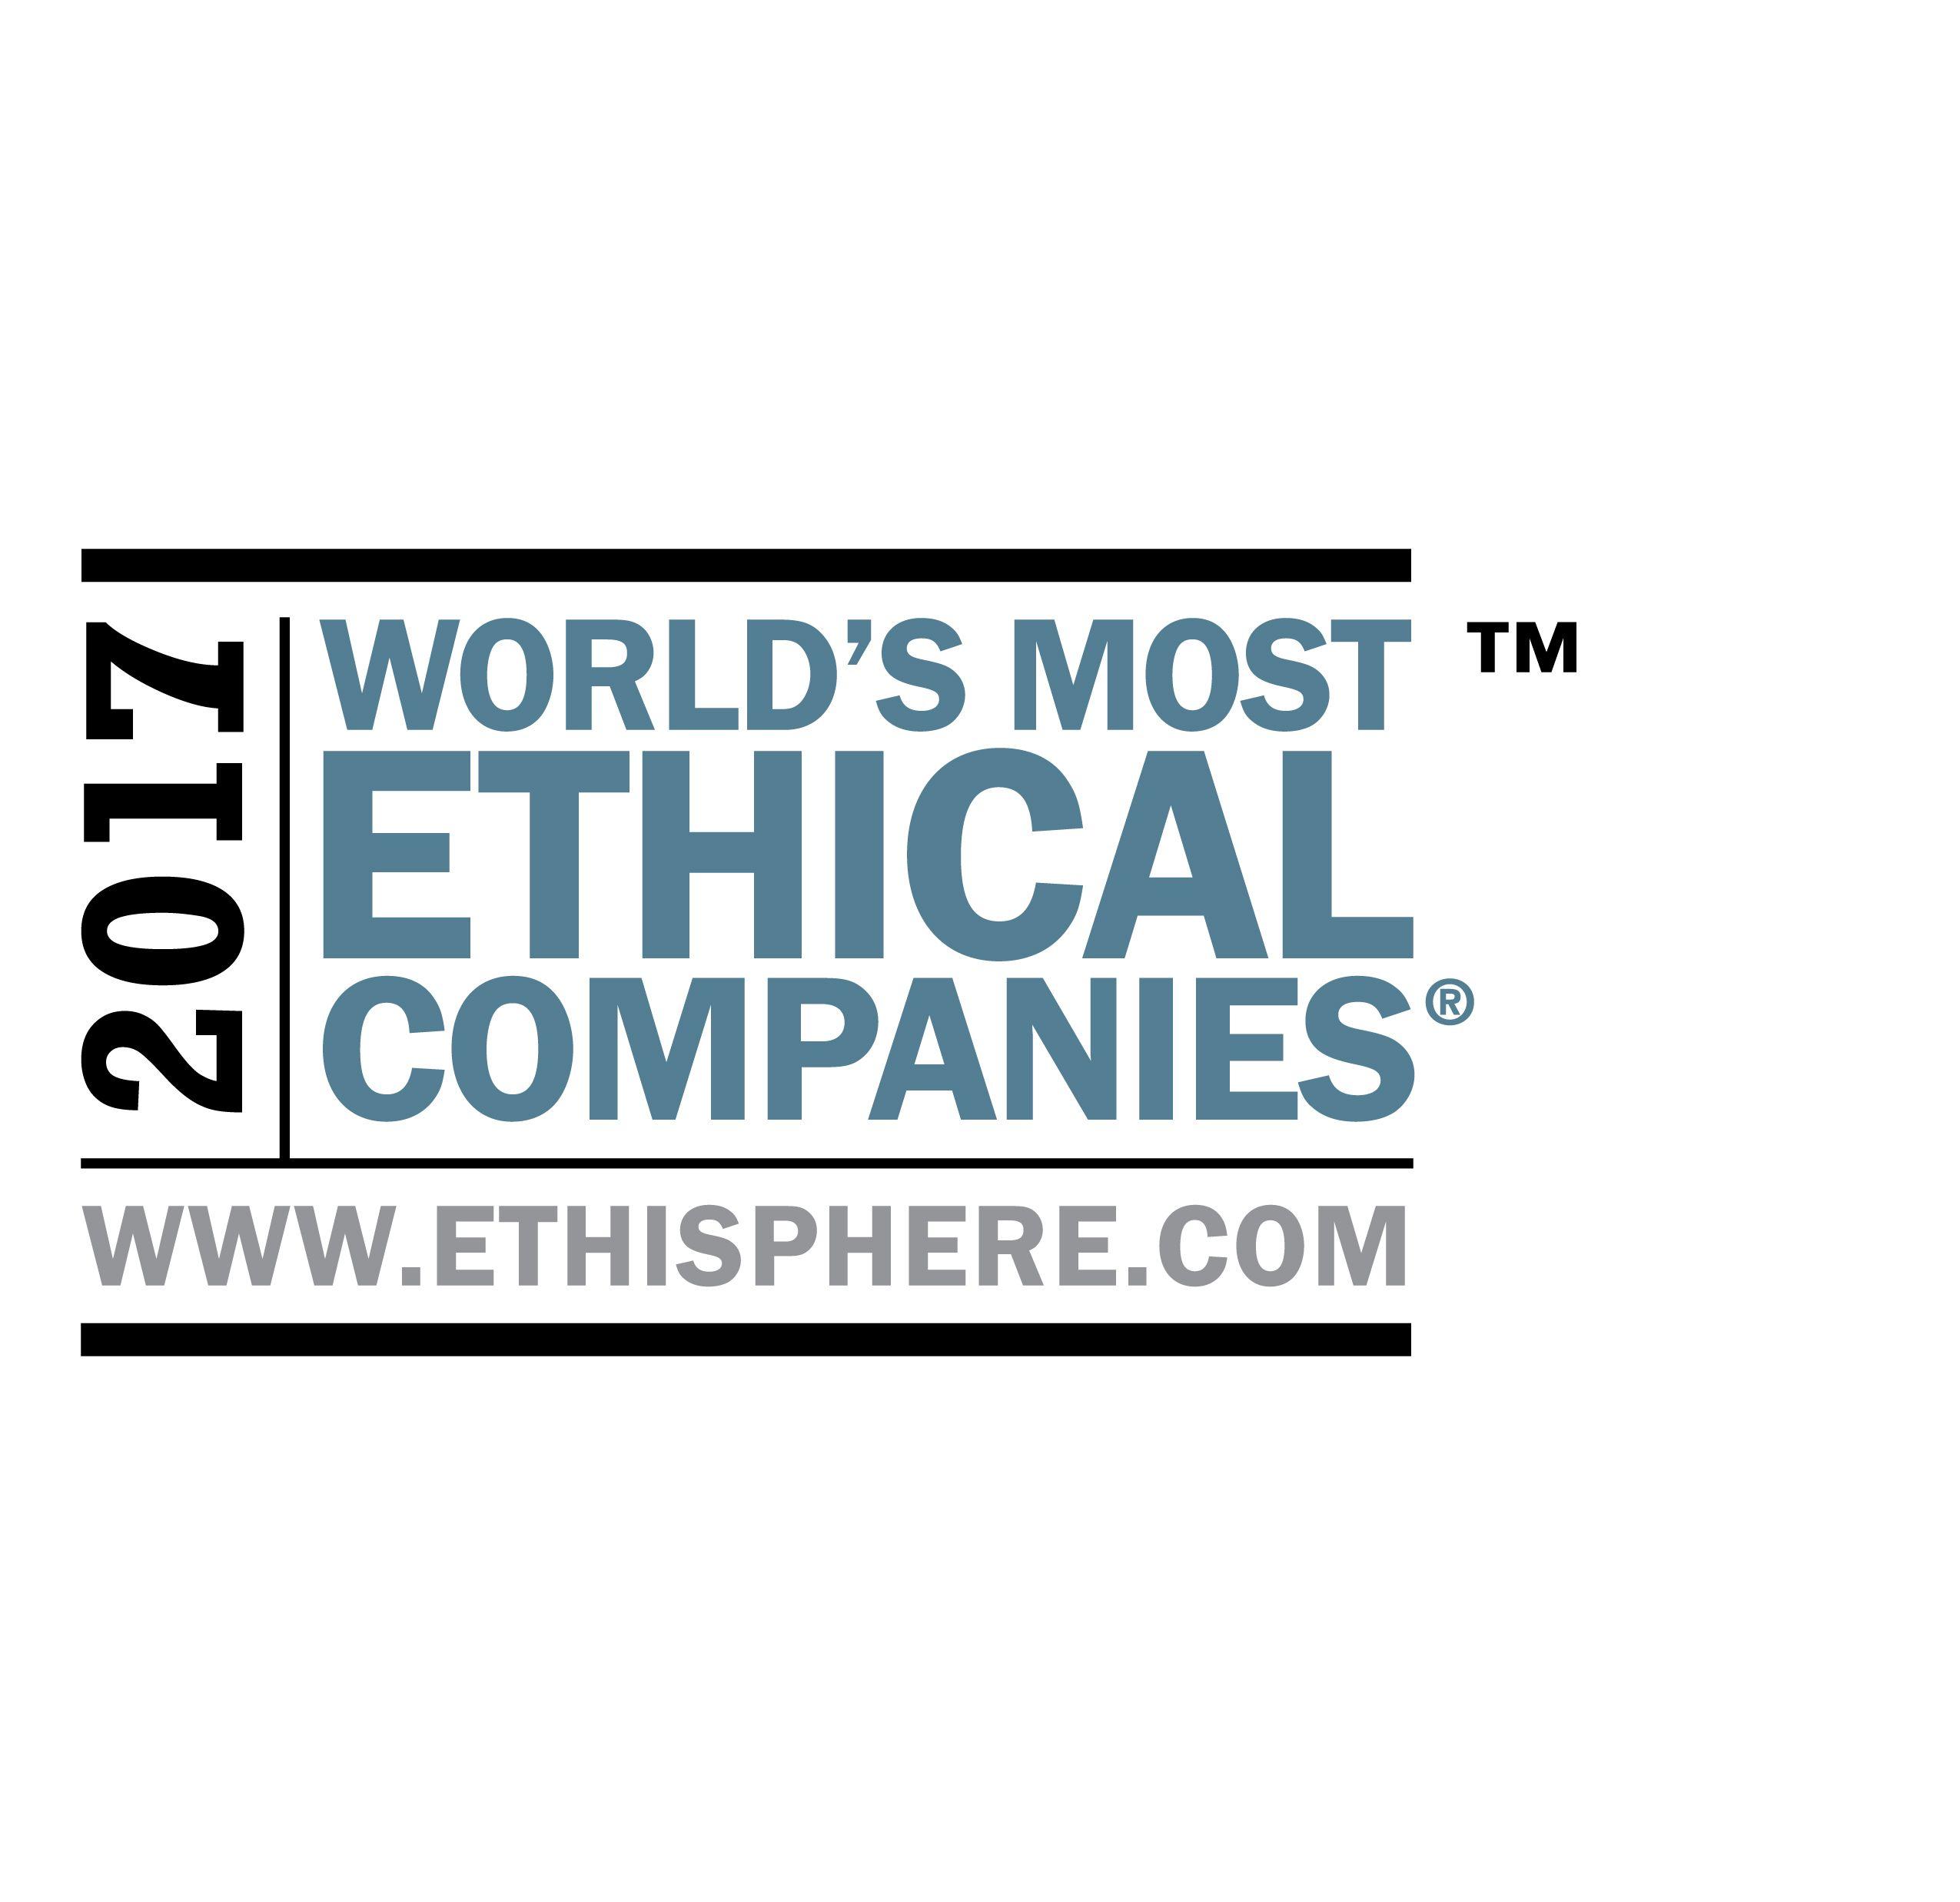 Ethisphere Award Logo - World's Most Ethical Companies by the Ethisphere Institute (2010 ...